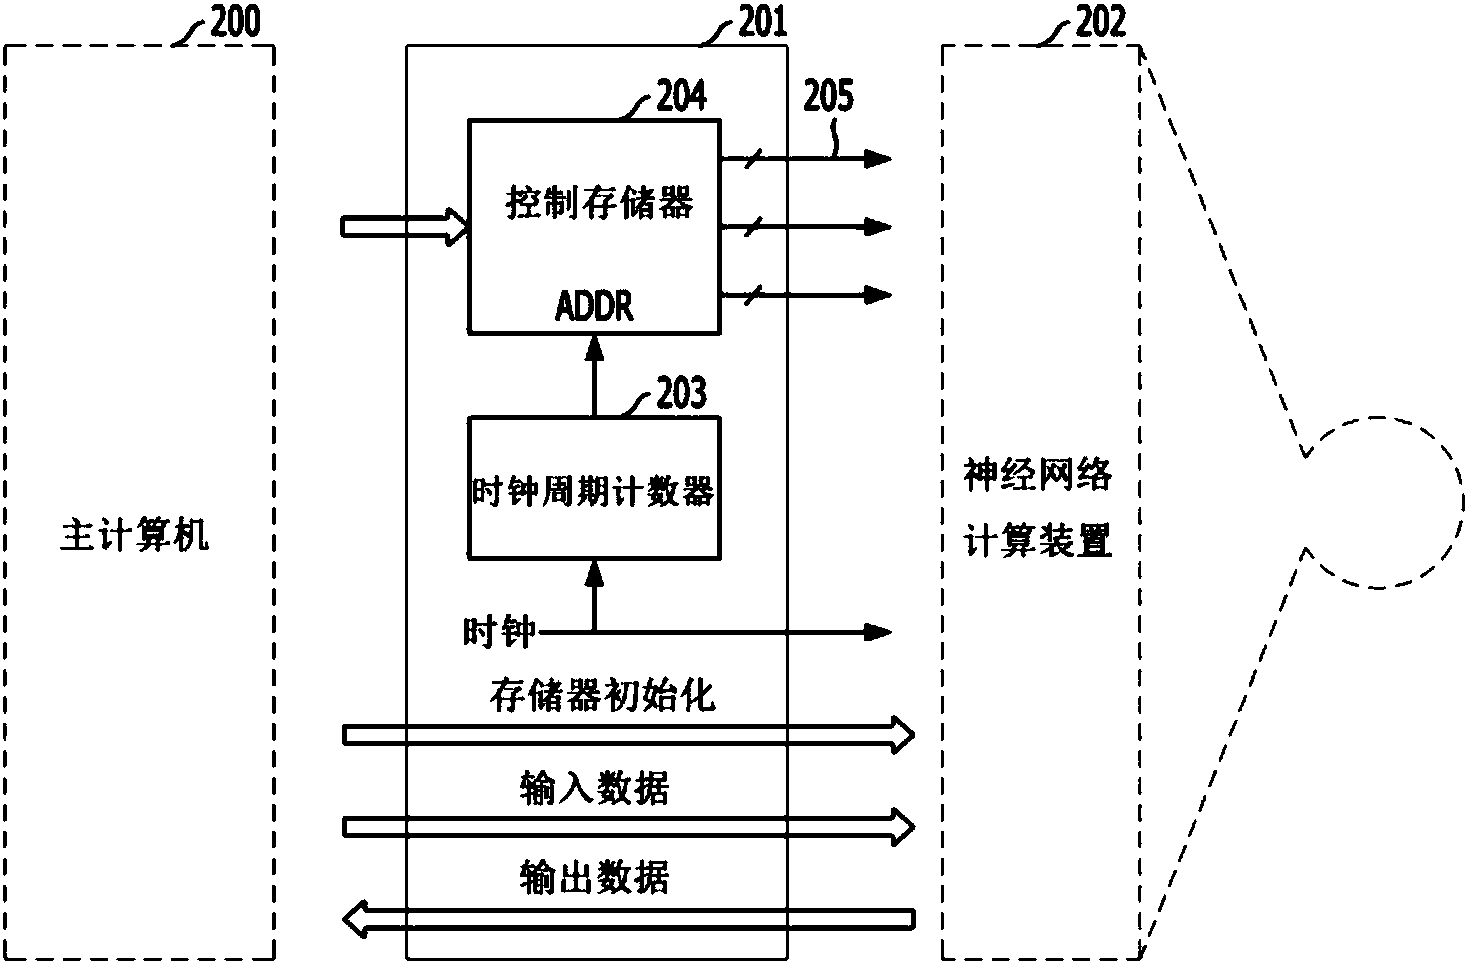 Neural network computing apparatus and system, and method therefor